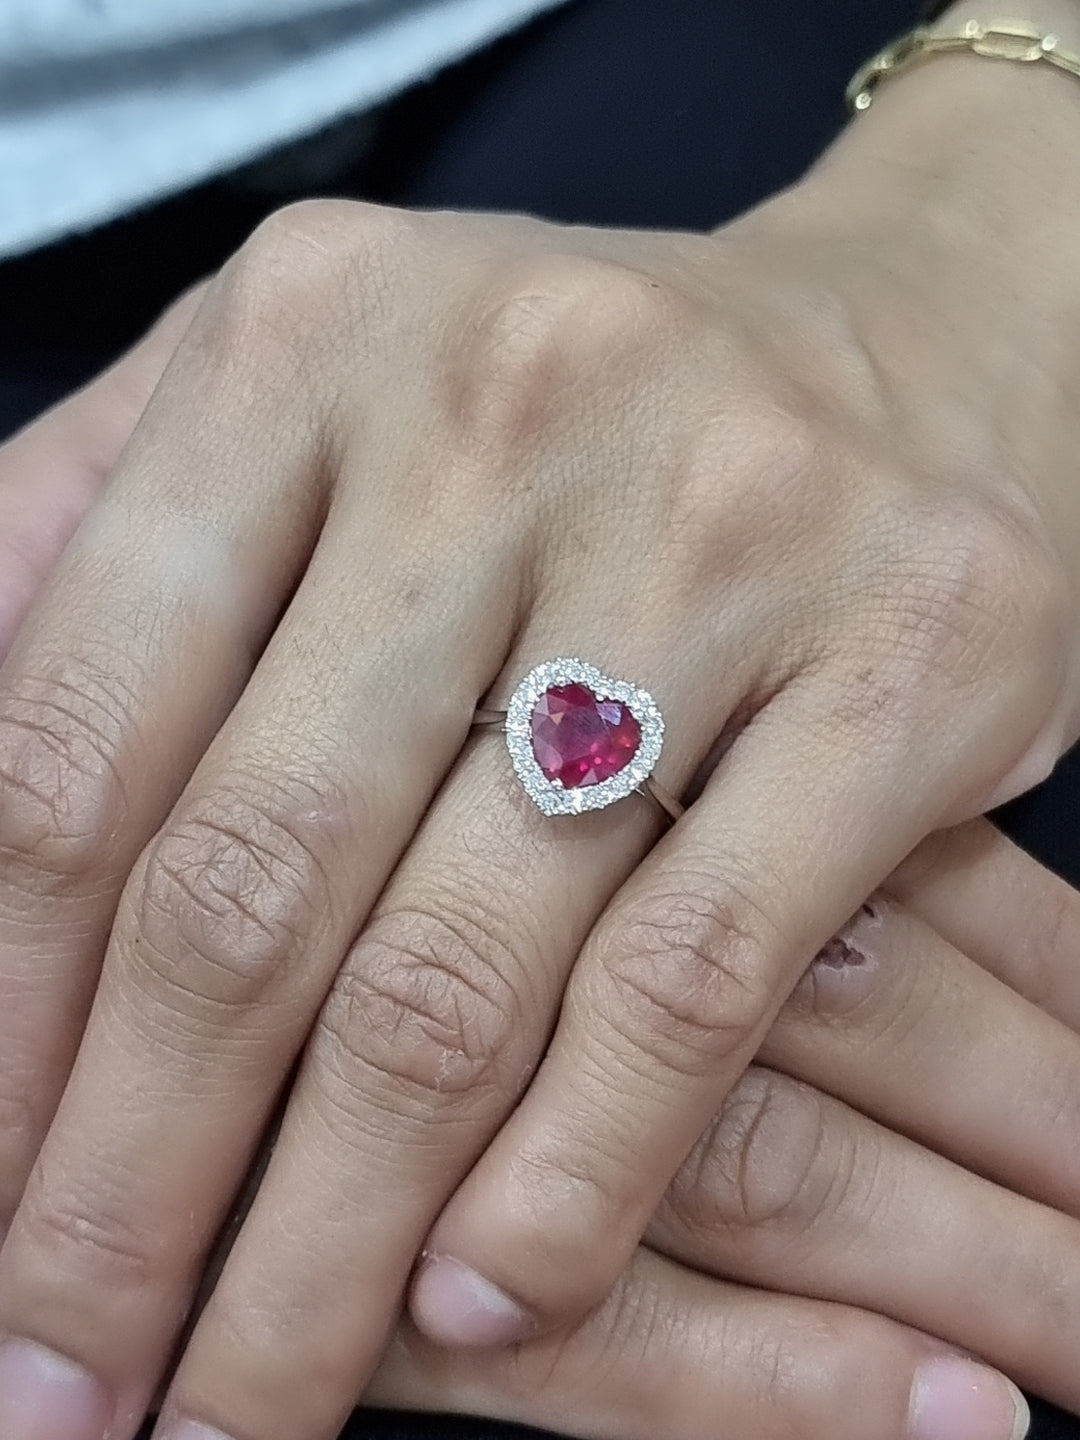 Heart Shape Ruby And Diamond Ring In18k White Gold.